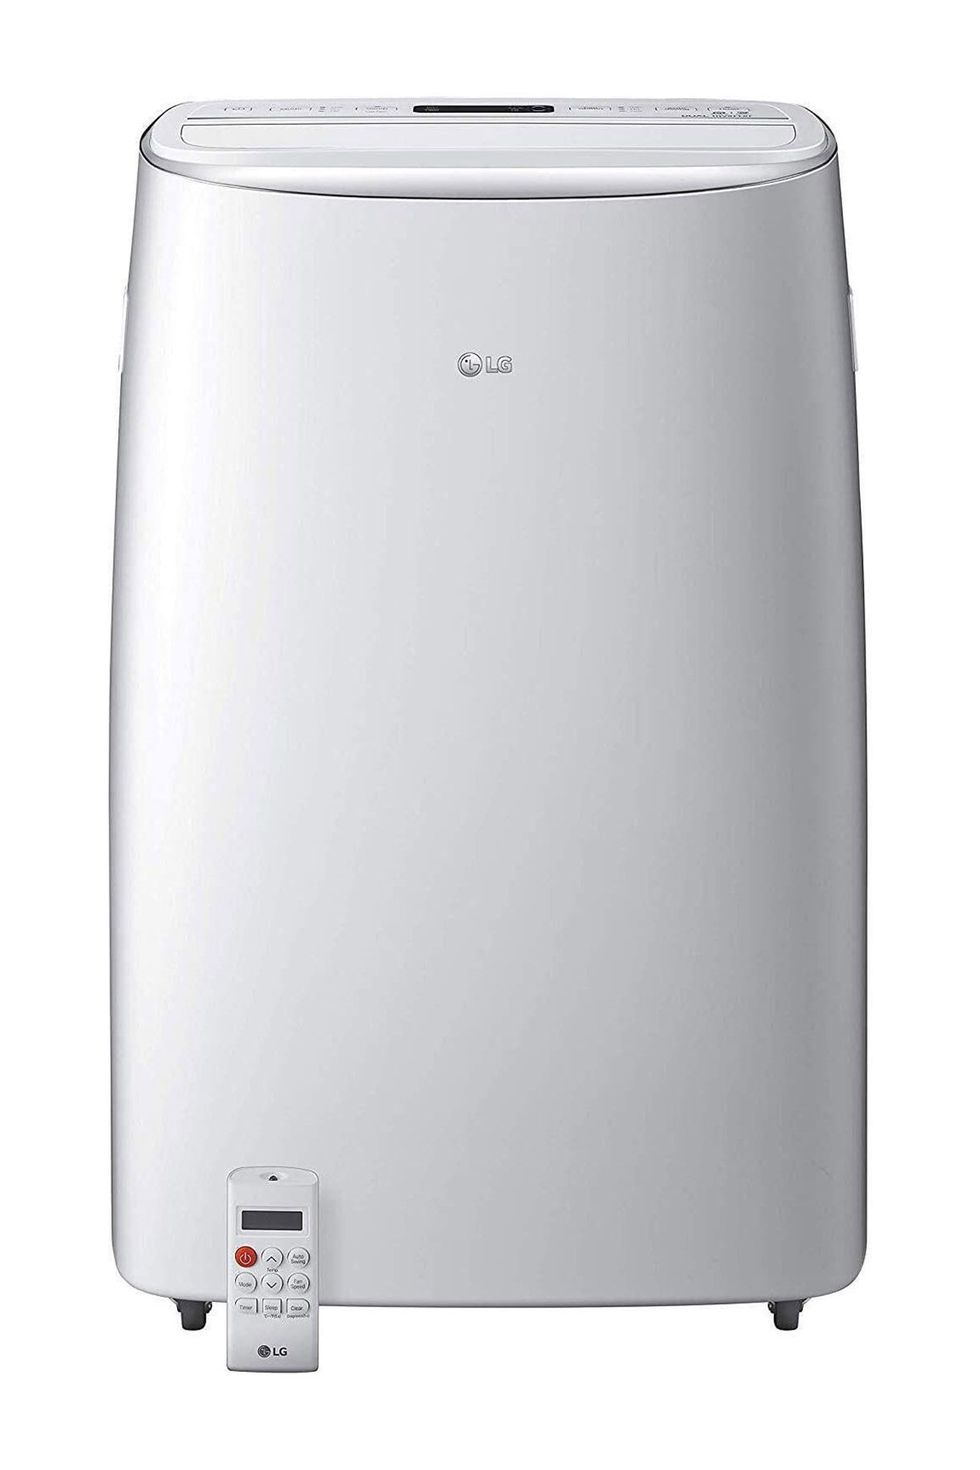 https://hips.hearstapps.com/vader-prod.s3.amazonaws.com/1647886706-best-portable-air-conditioners-lg-1647886671.jpg?crop=0.6666666666666666xw:1xh;center,top&resize=980:*